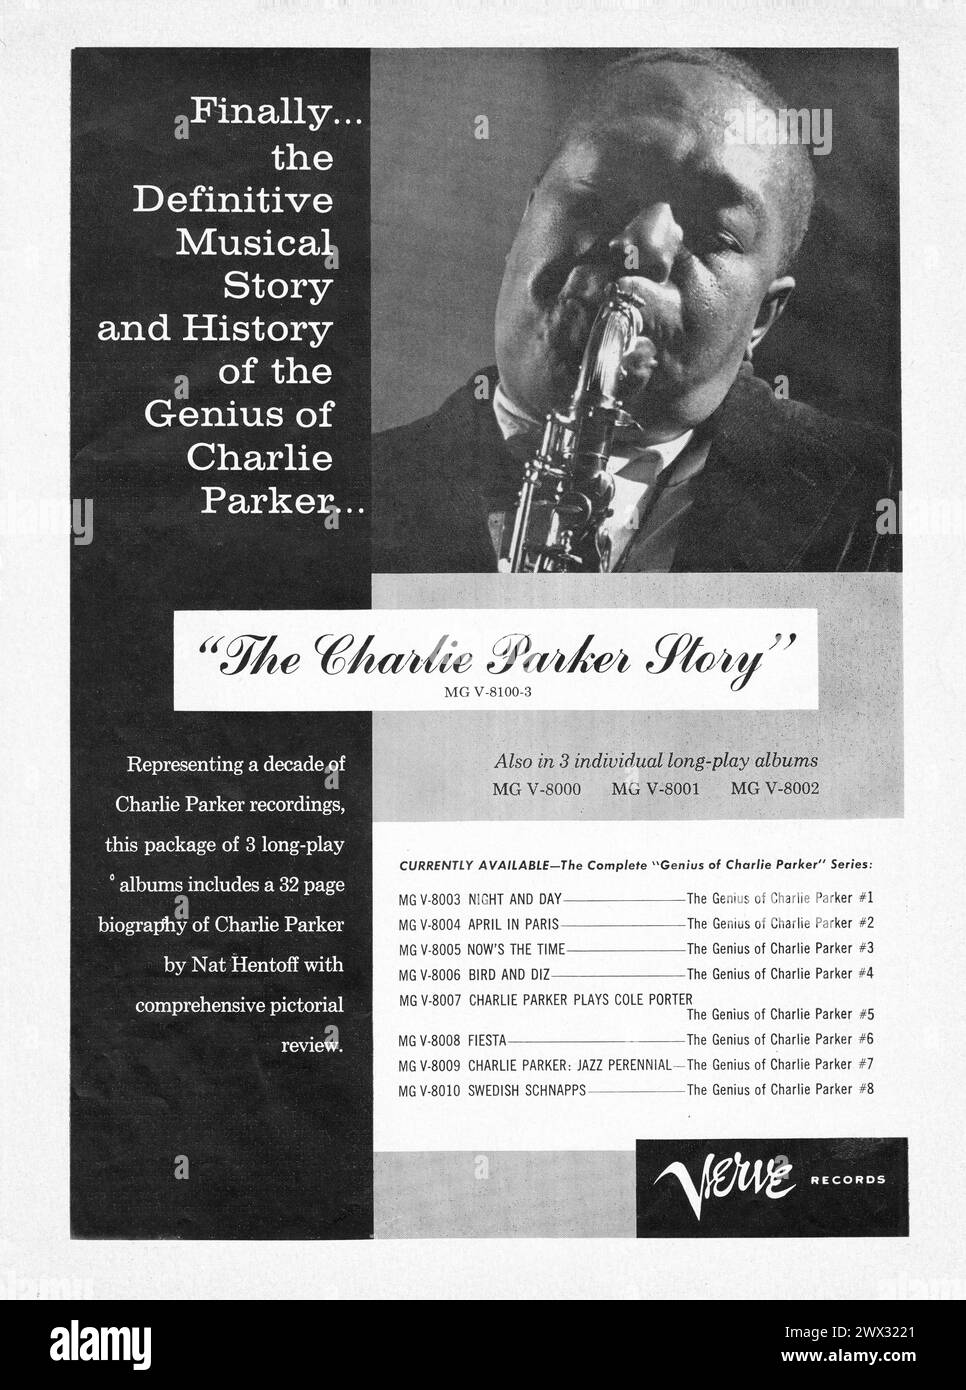 A Verve ad for a 3 lp set of the recordings of jazz giant, Charlie Parker. It's an early example merchandising a box set. From a 1960s music magazine. Stock Photo